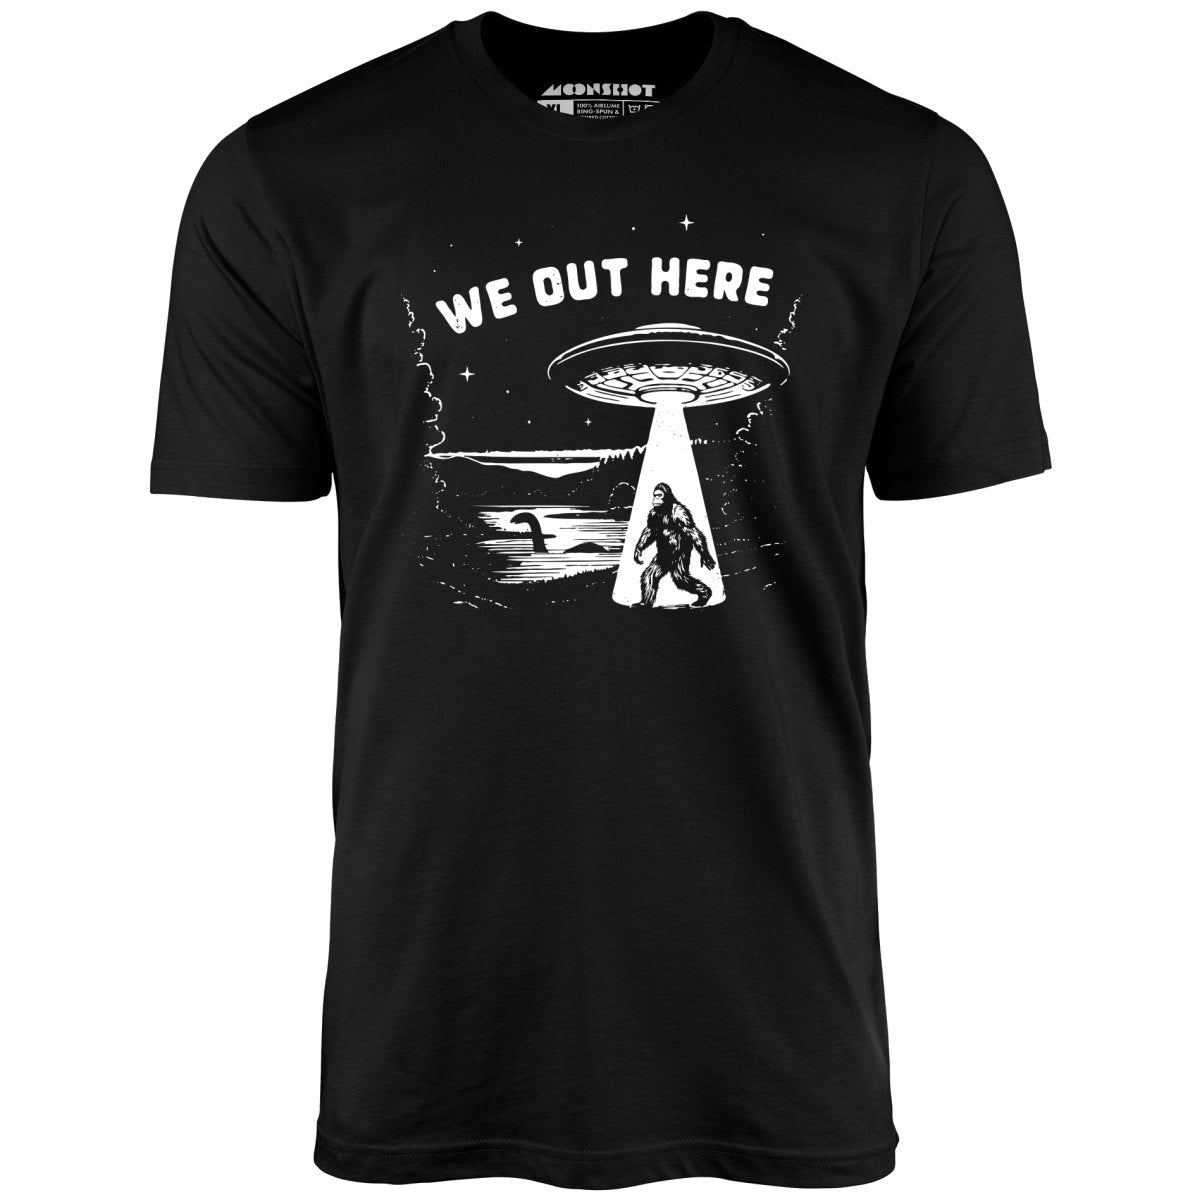 We Out Here - Unisex T-Shirt